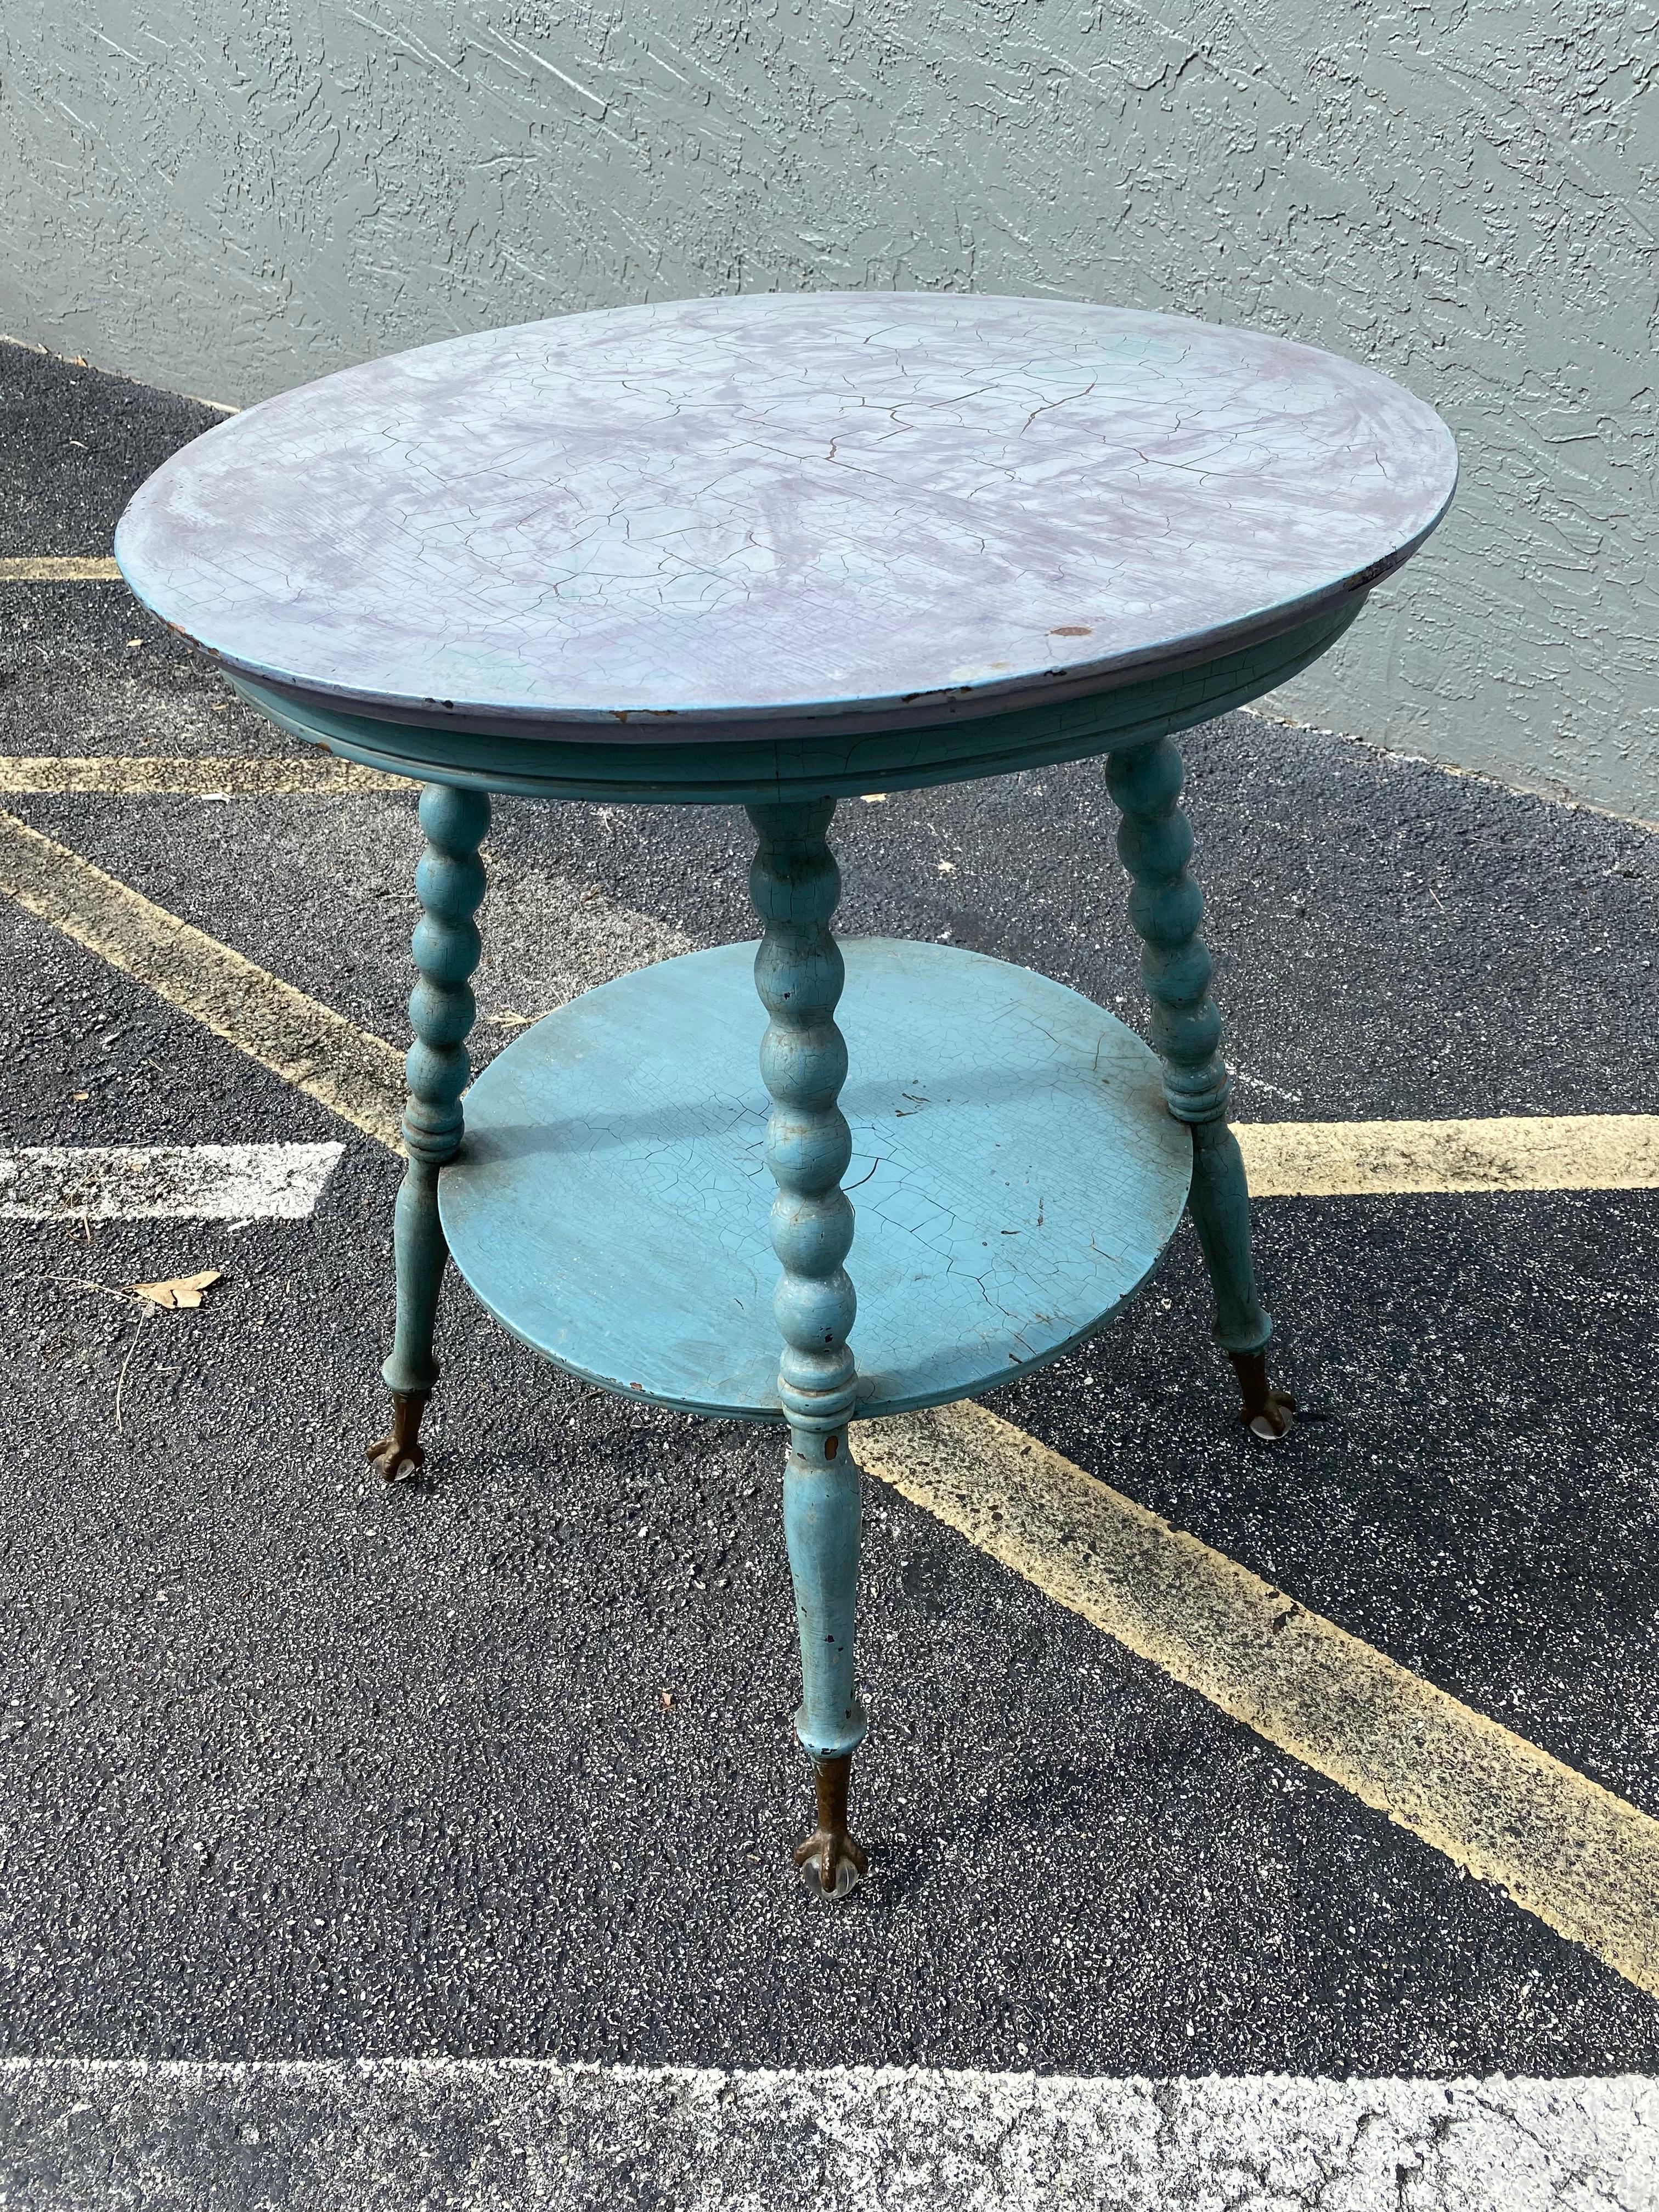 1940s Ball and Claw Round Wood Turquoise Table In Good Condition For Sale In Fort Lauderdale, FL